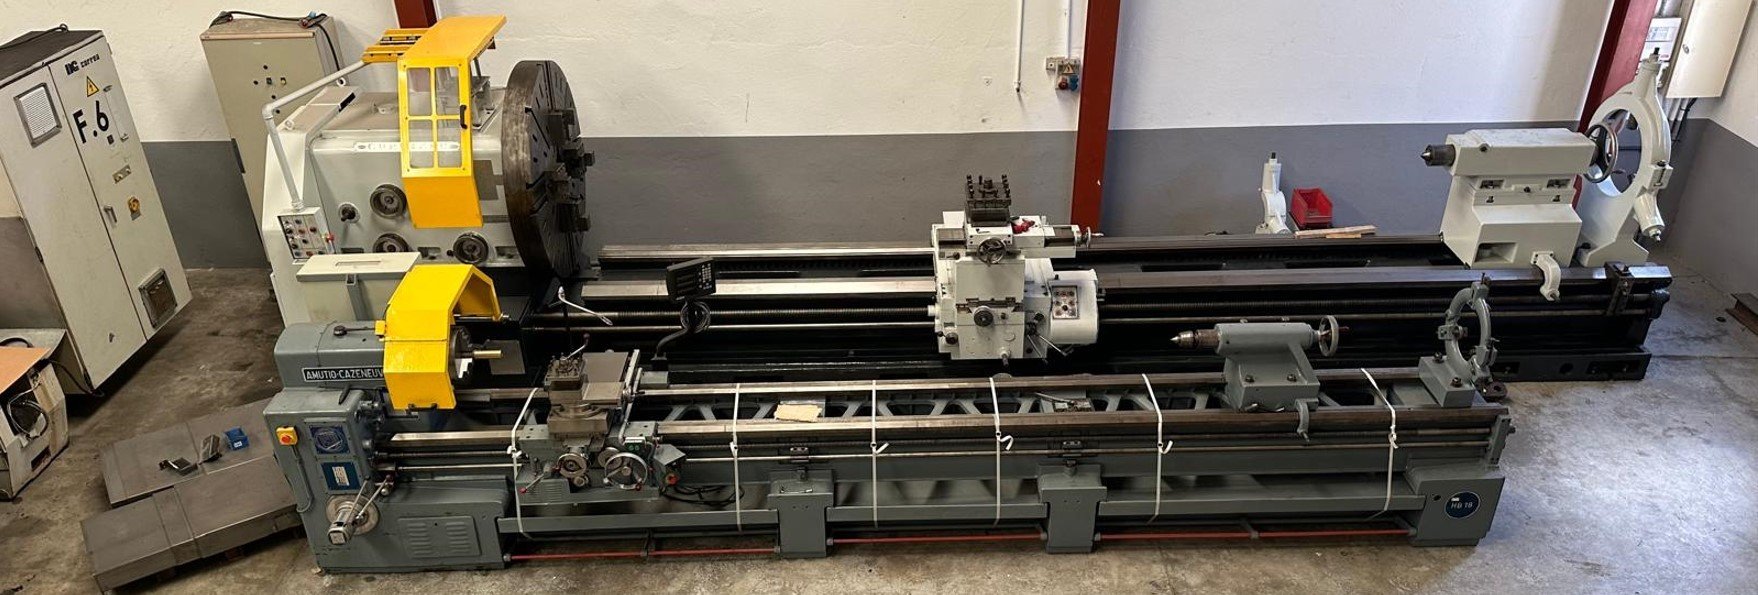 Used lathes :: Used Industrial Machinery - Valcomaq